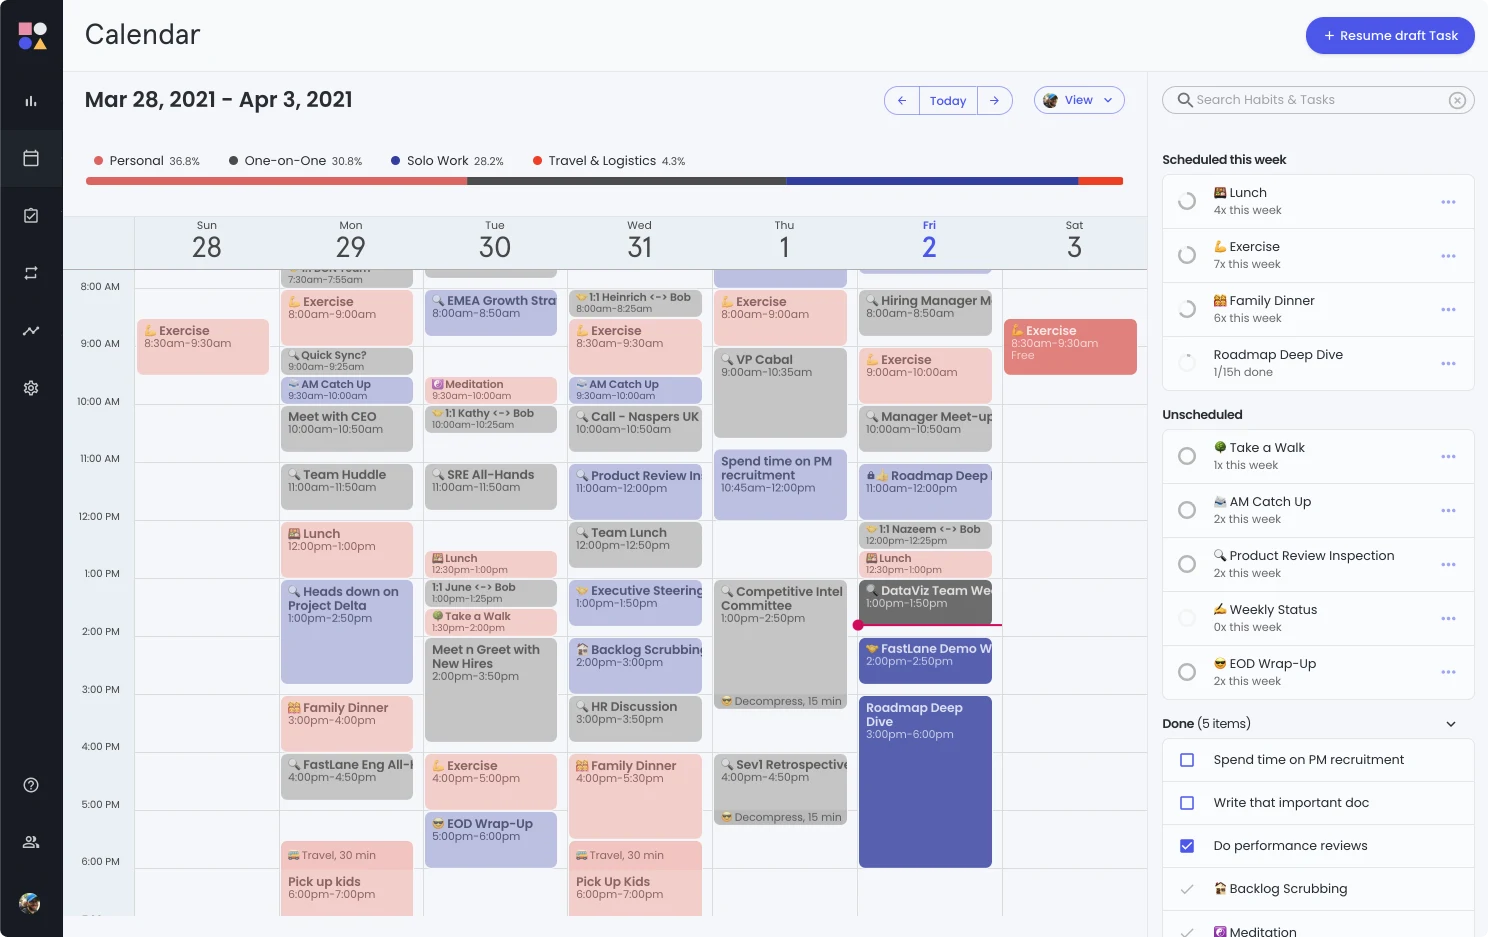 A full calendar, easily rearranged and re-prioritized if needed.